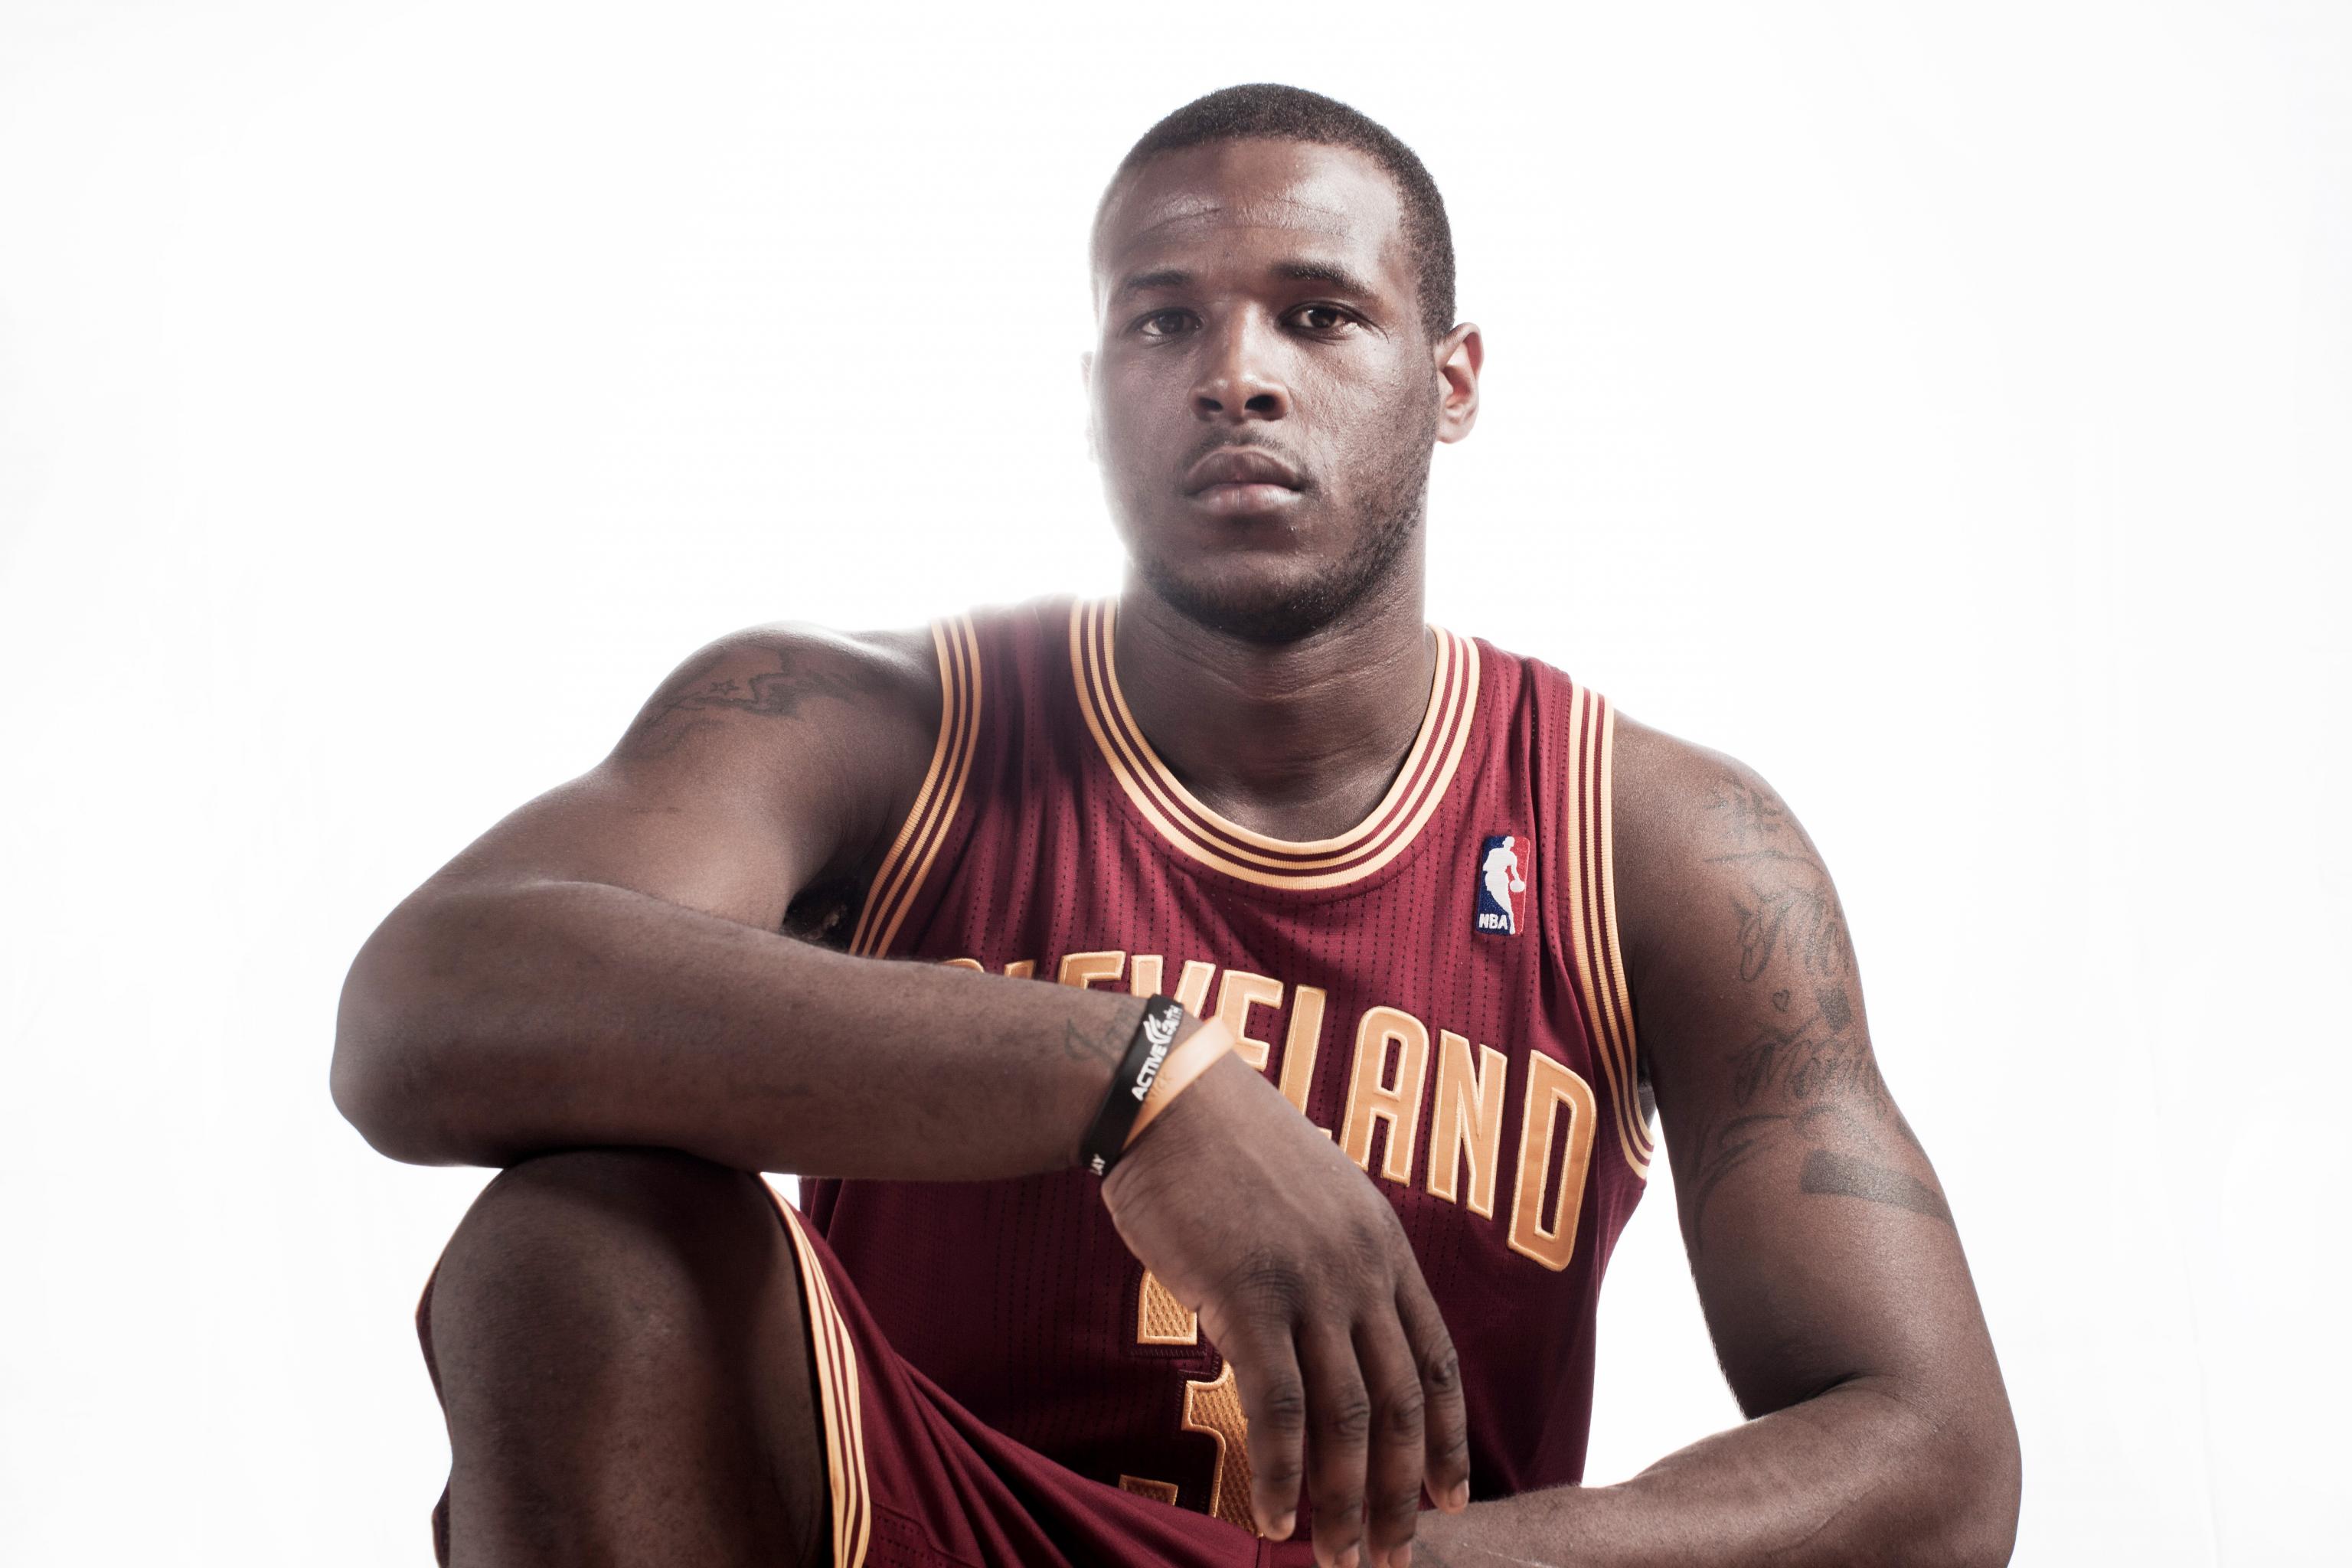 Dion Waiters wants everyone to know that he is not out of shape